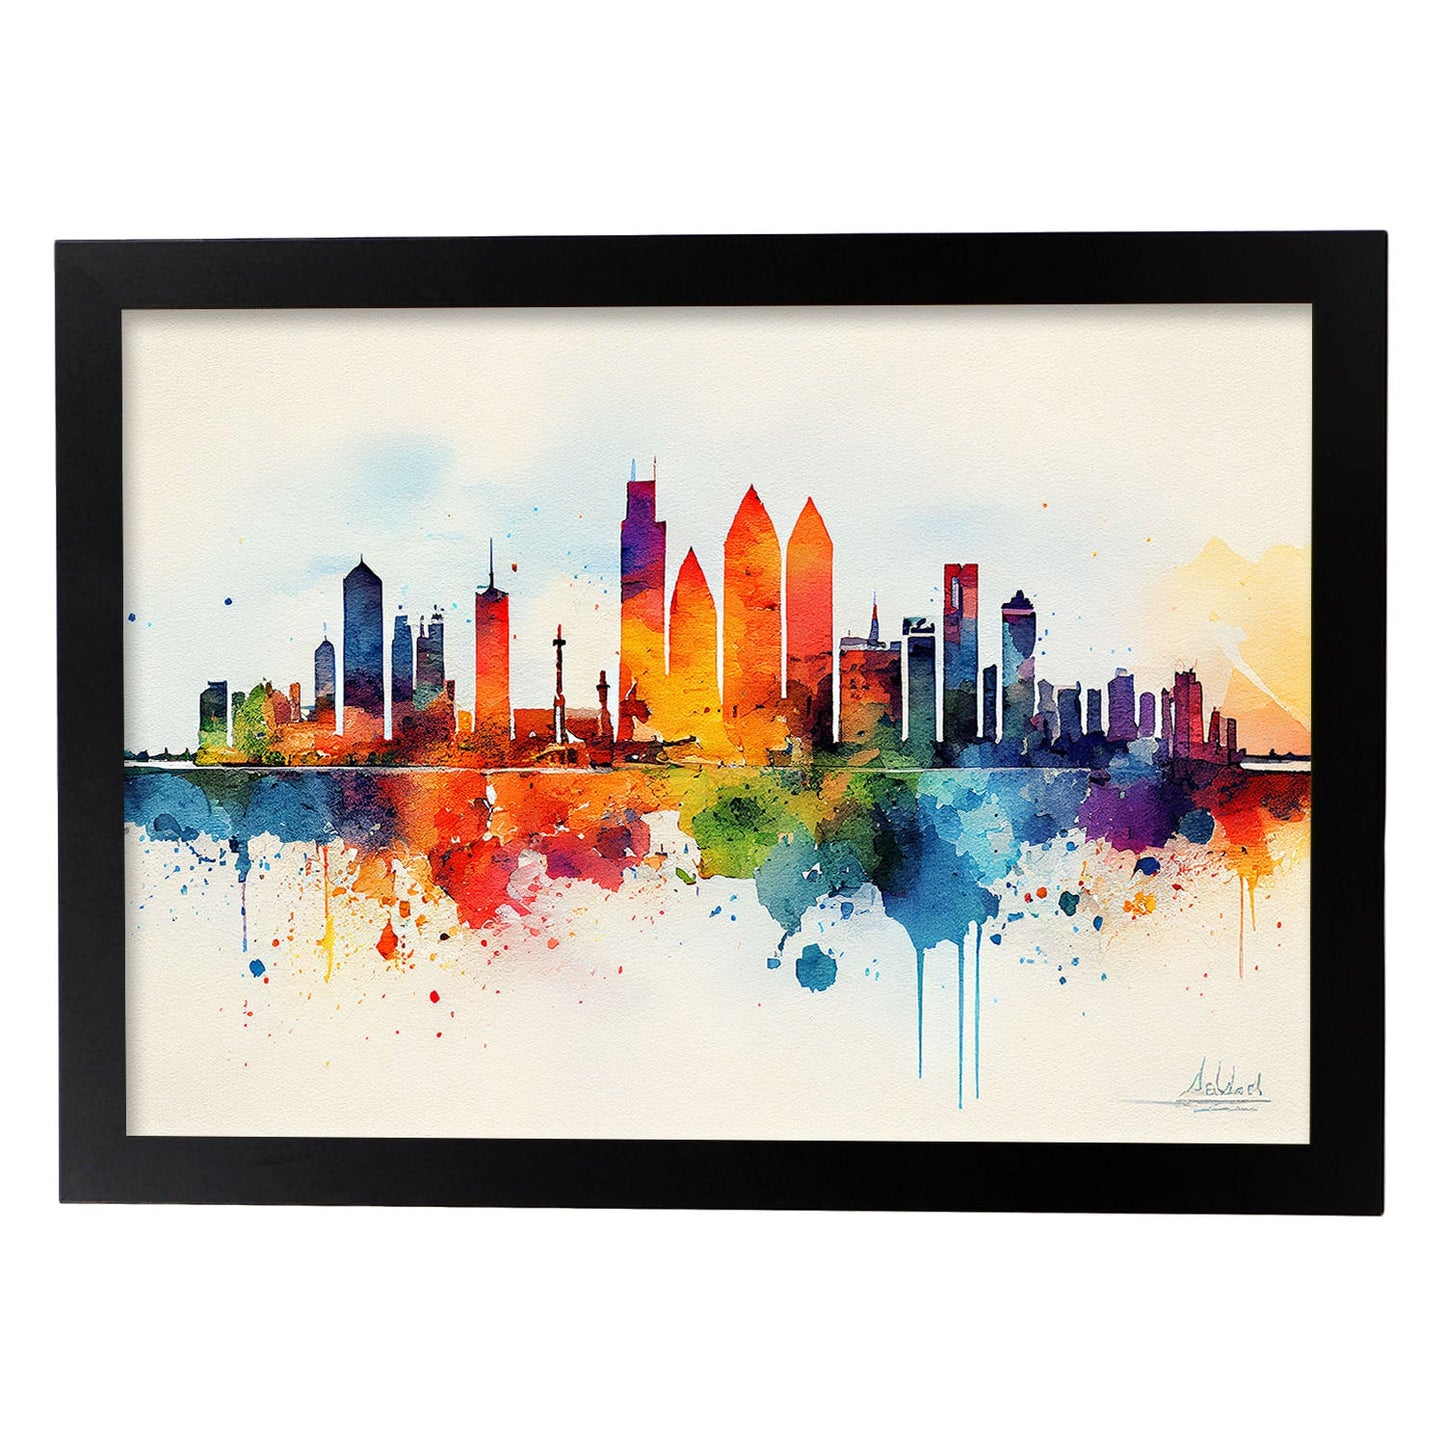 Nacnic watercolor of a skyline of the city of Abu Dhabi. Aesthetic Wall Art Prints for Bedroom or Living Room Design.